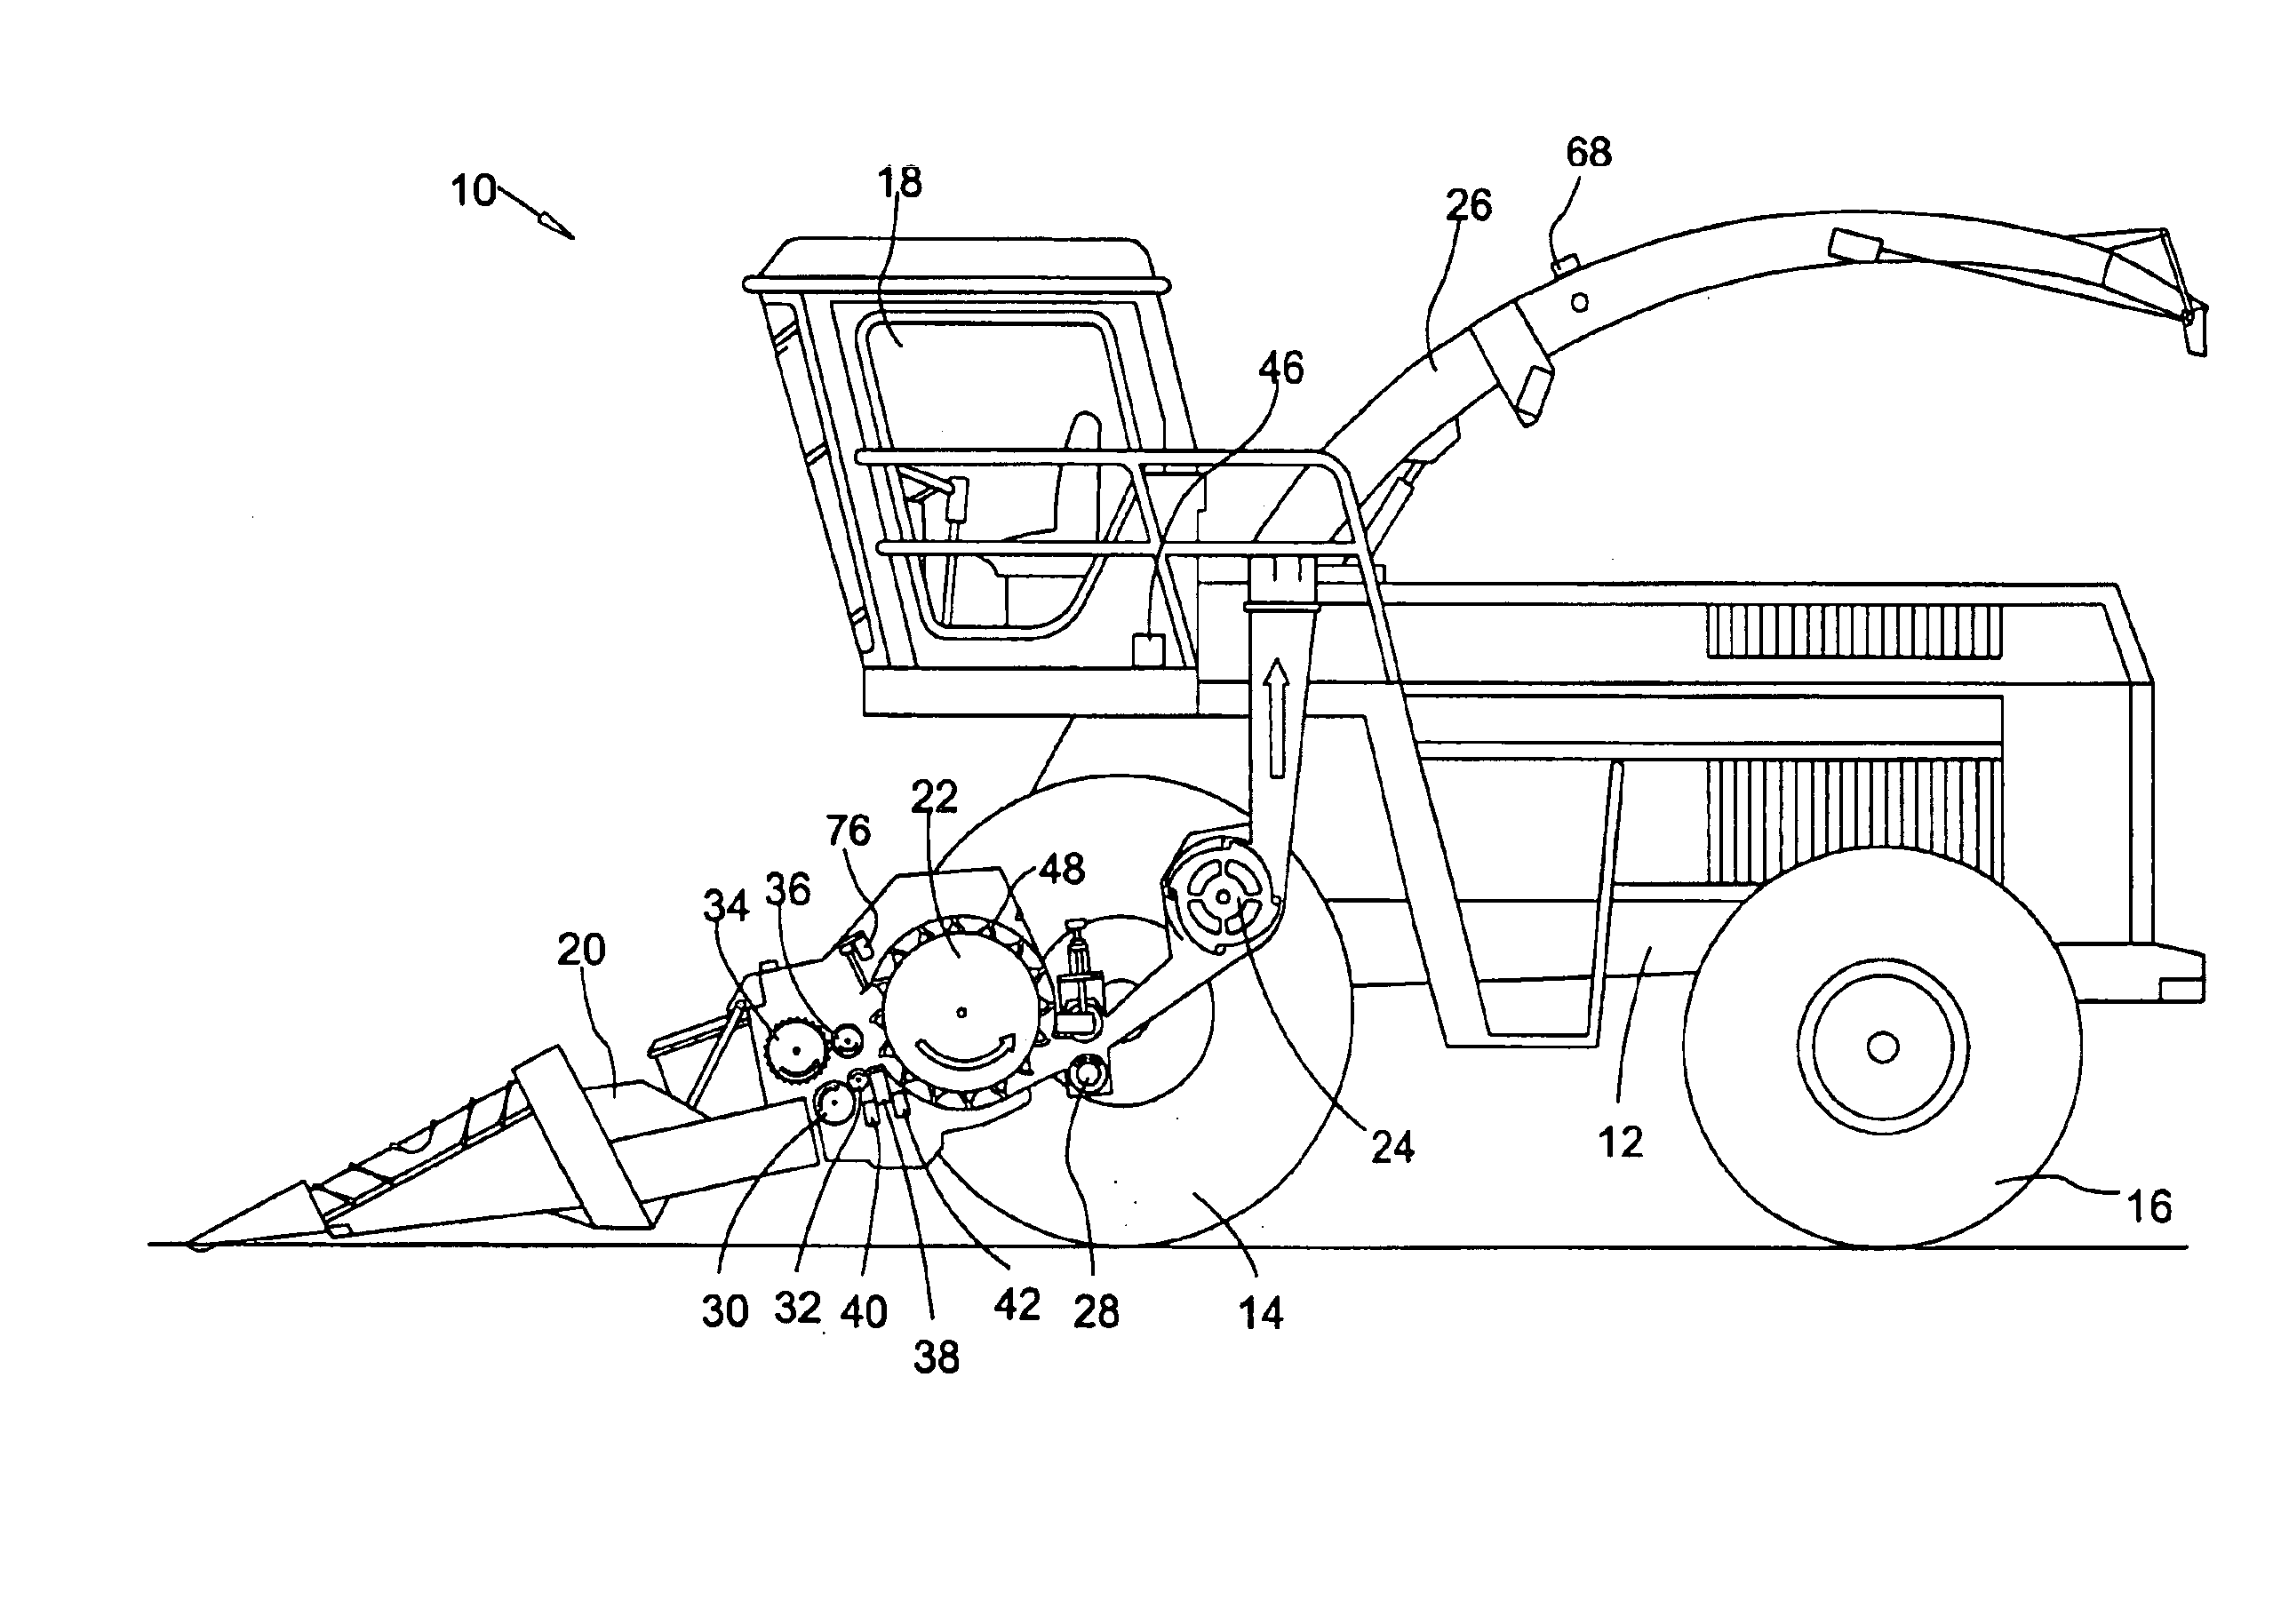 Device for measuring and/or checking the distance between a shear bar and a chopping knife